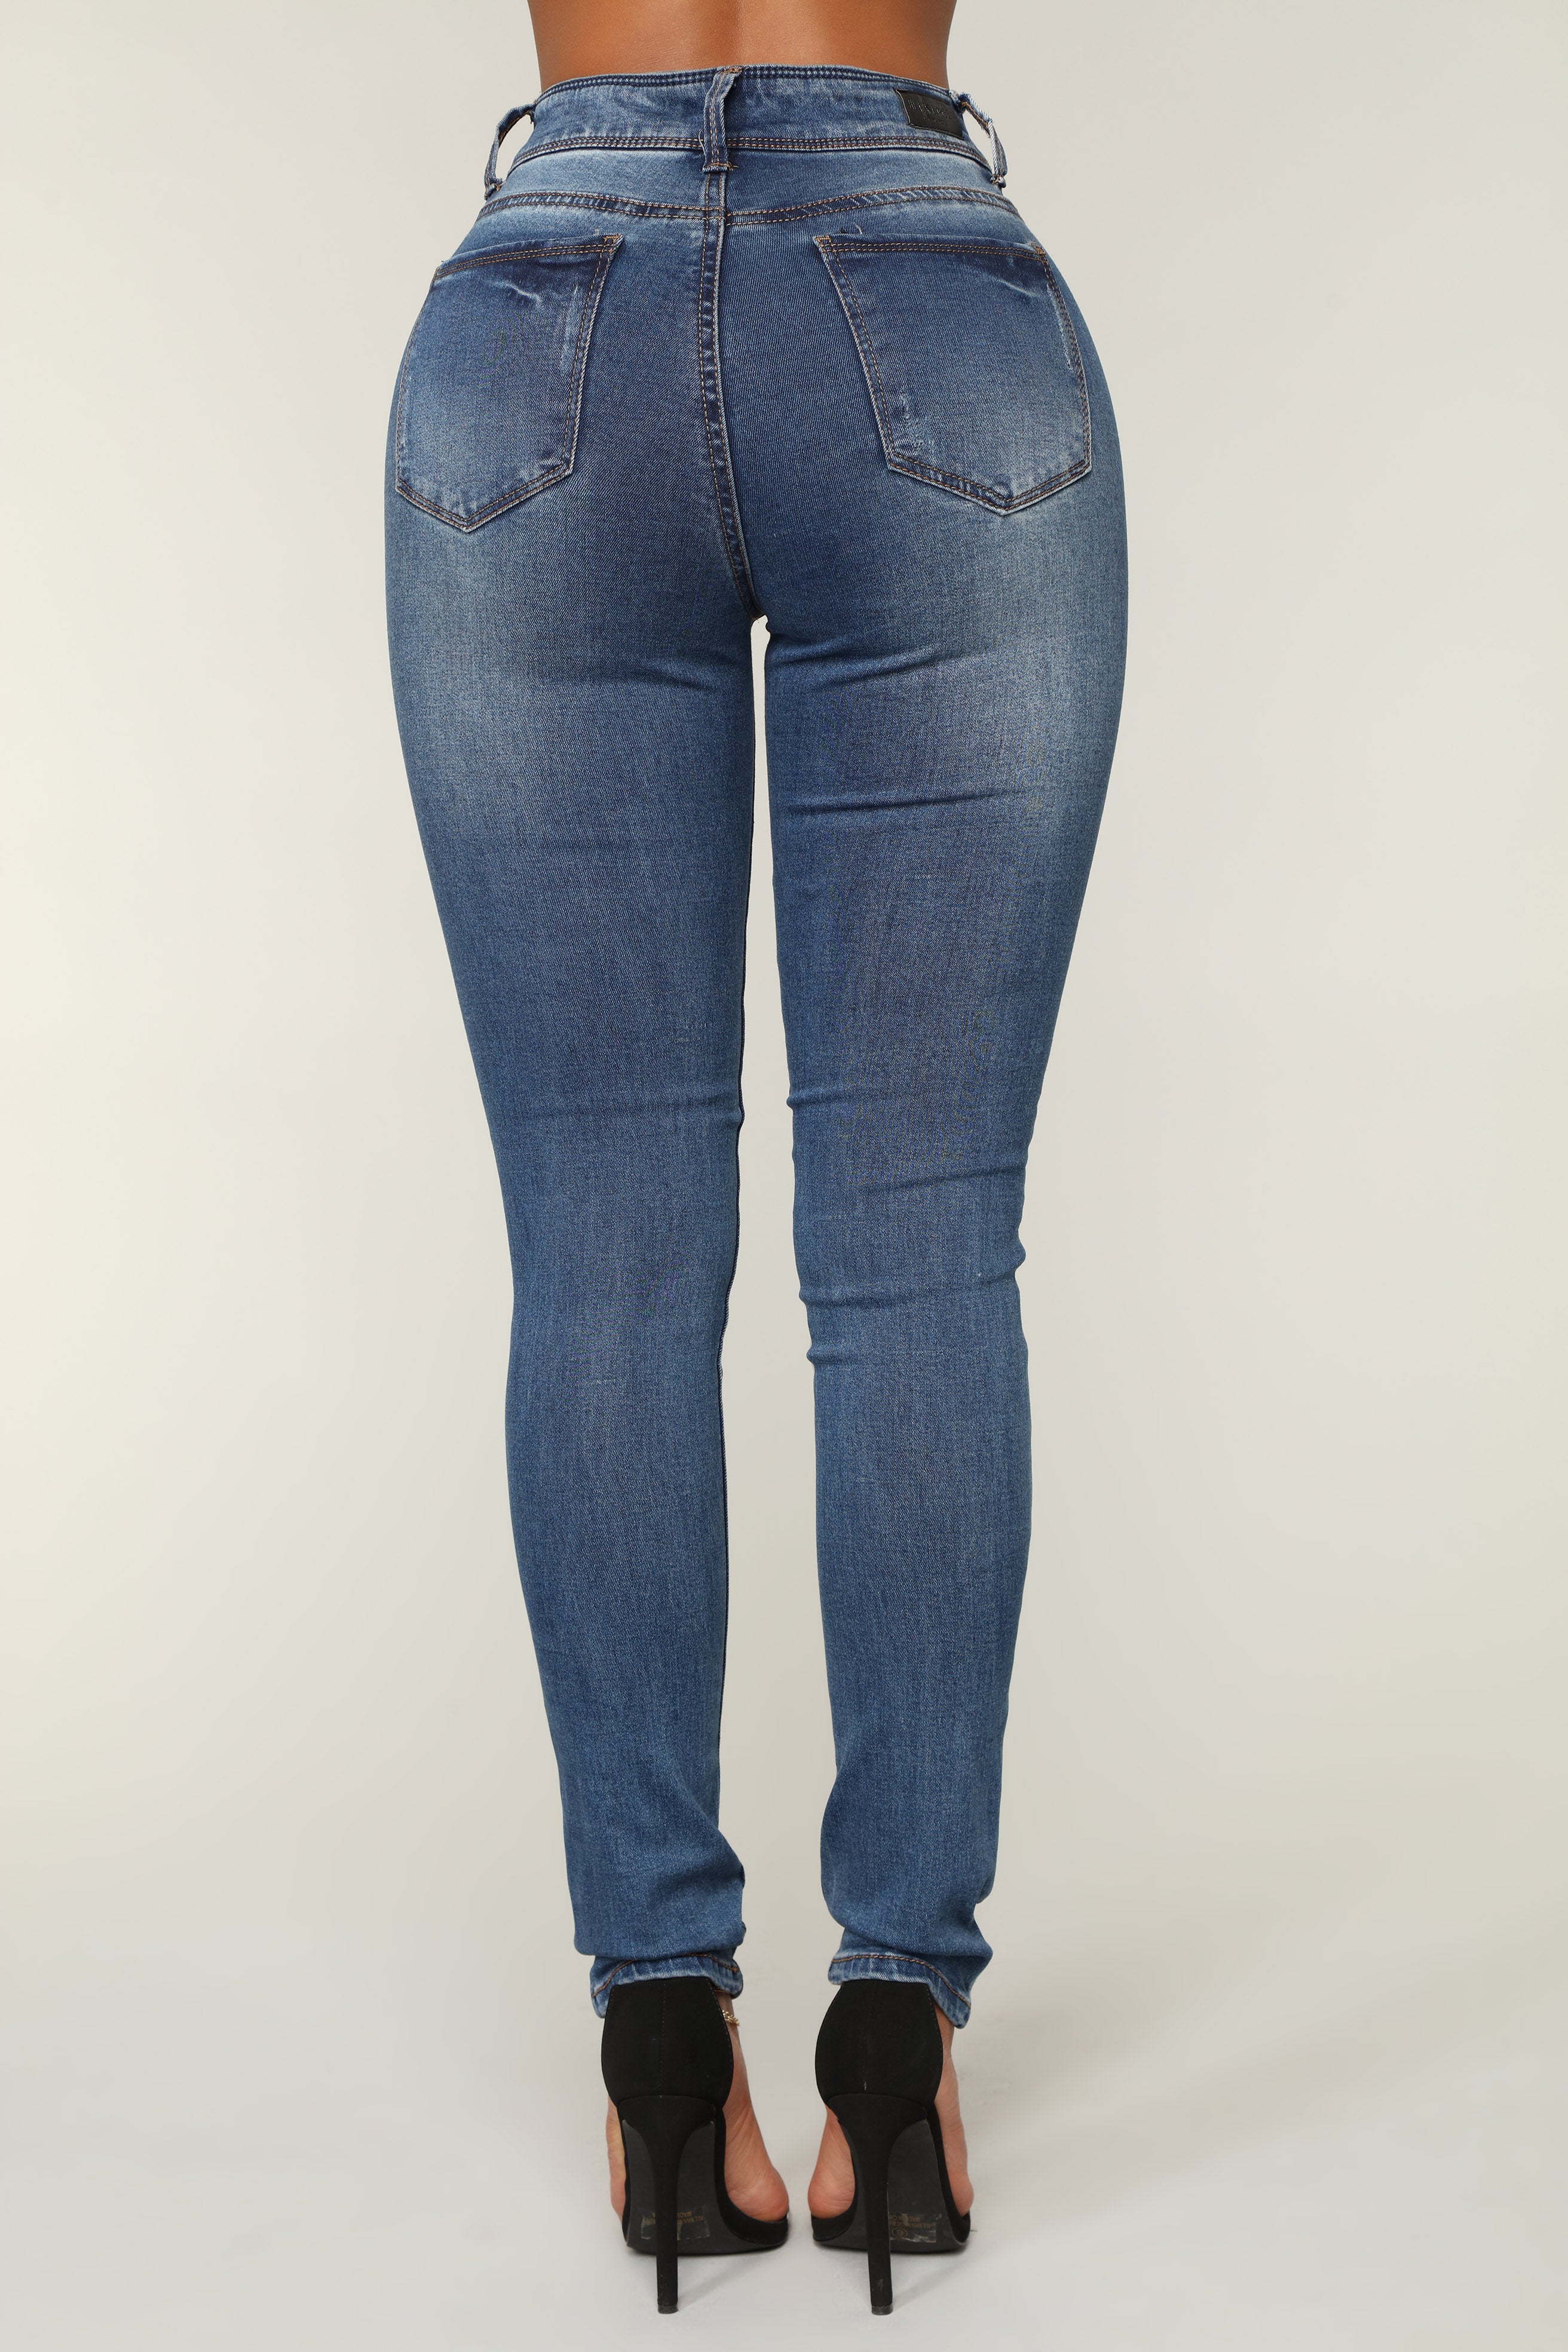 Middle of the Dance Floor Skinny Jeans - Medium Blue Wash